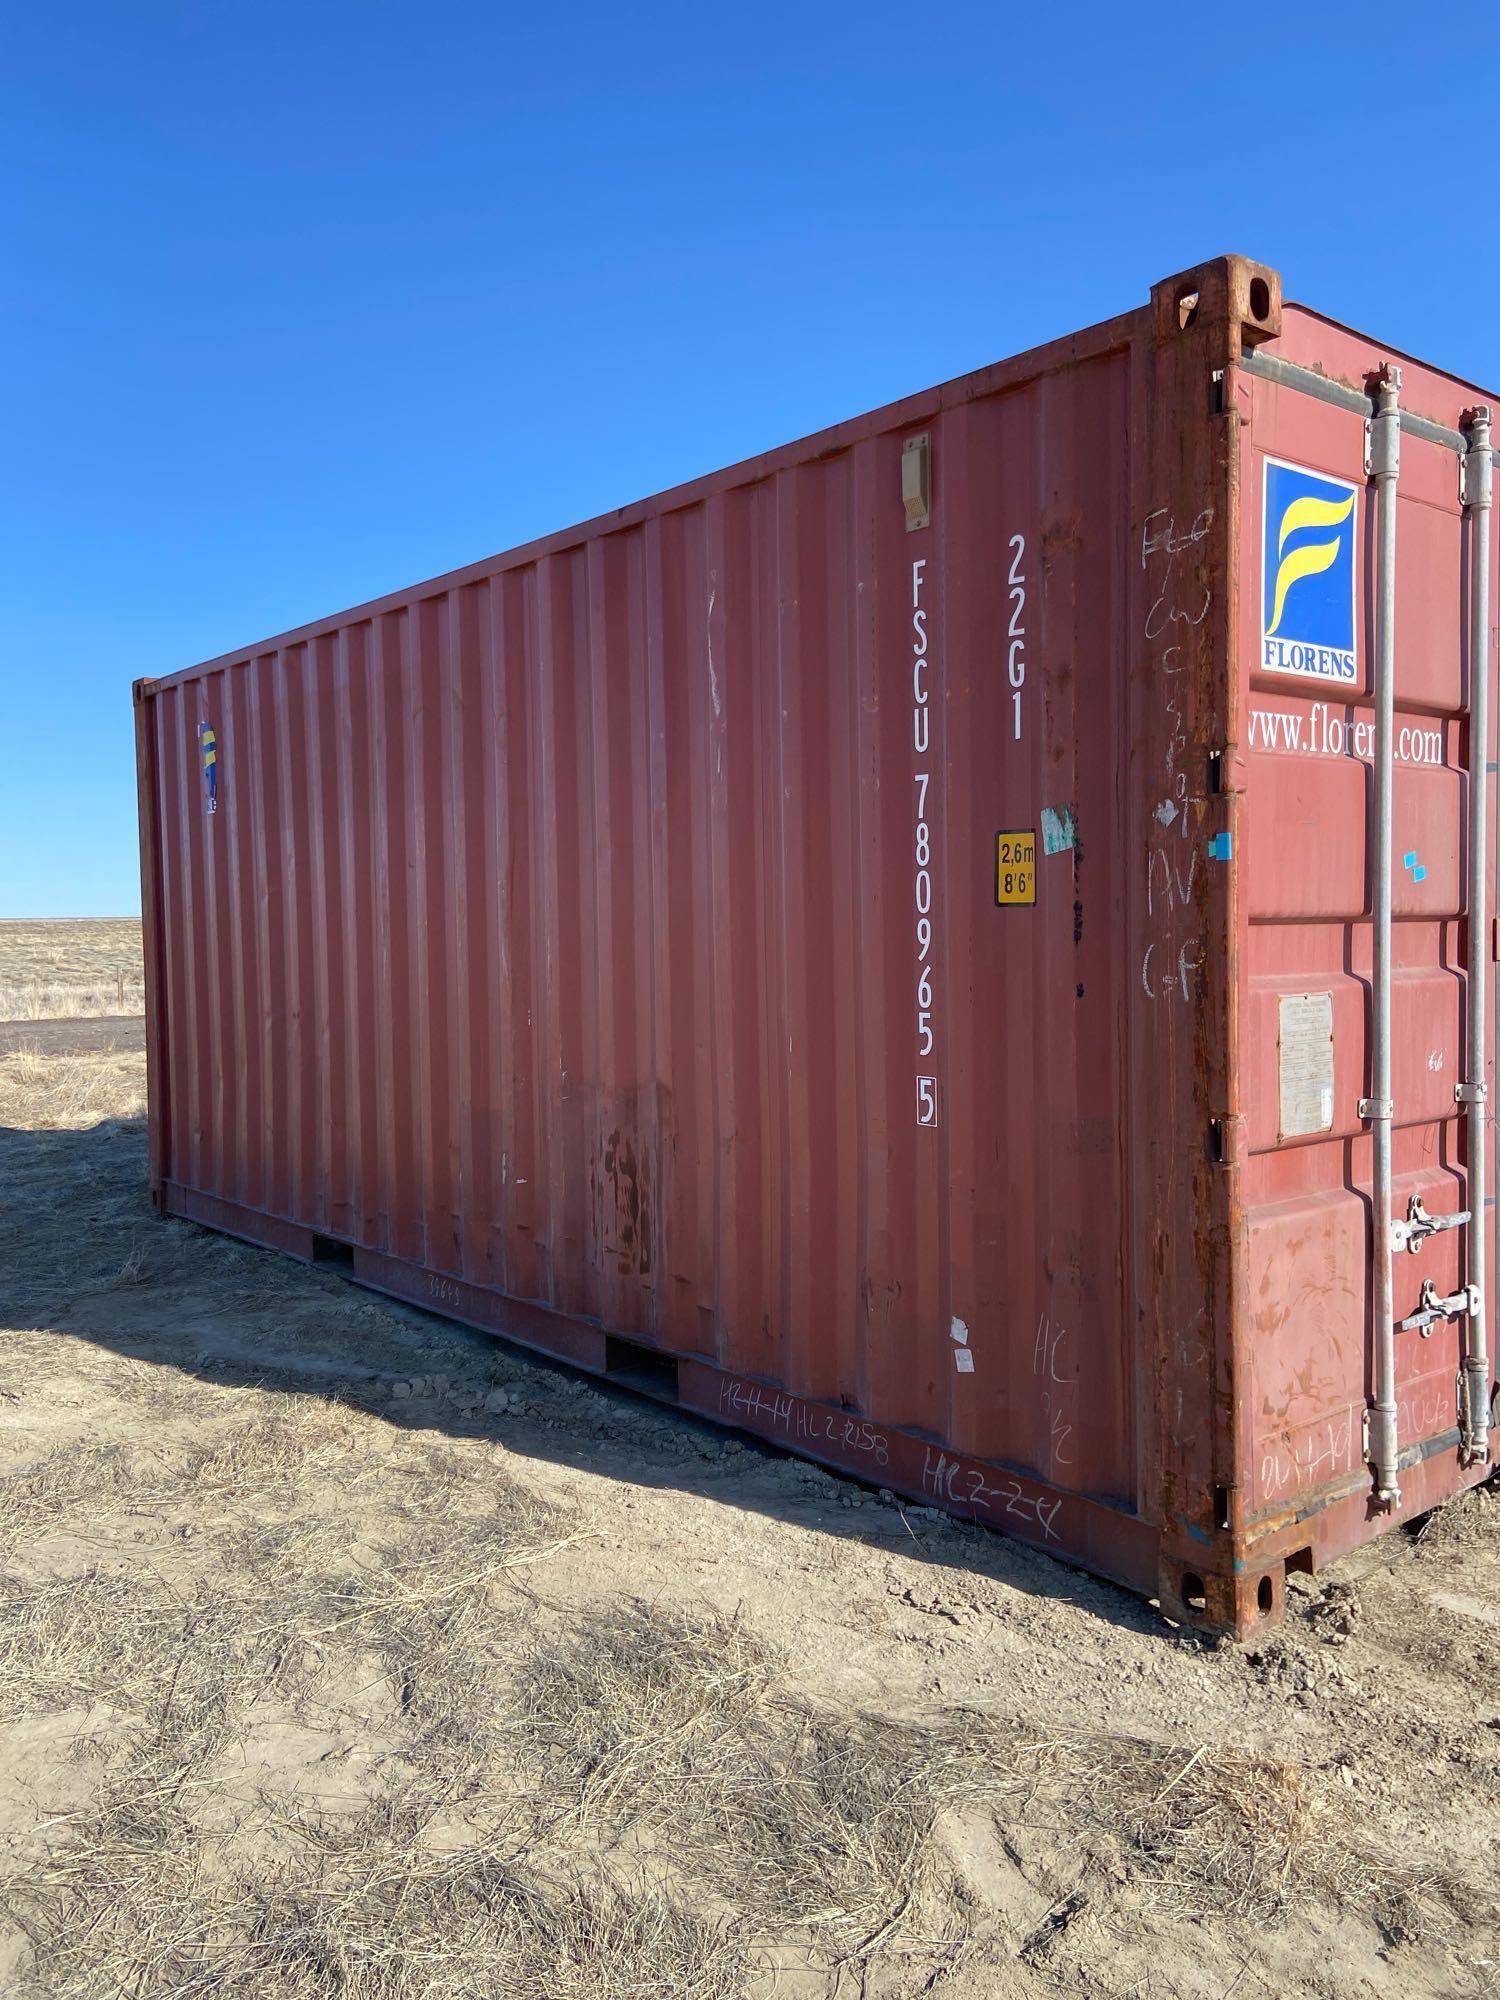 Used shipping container